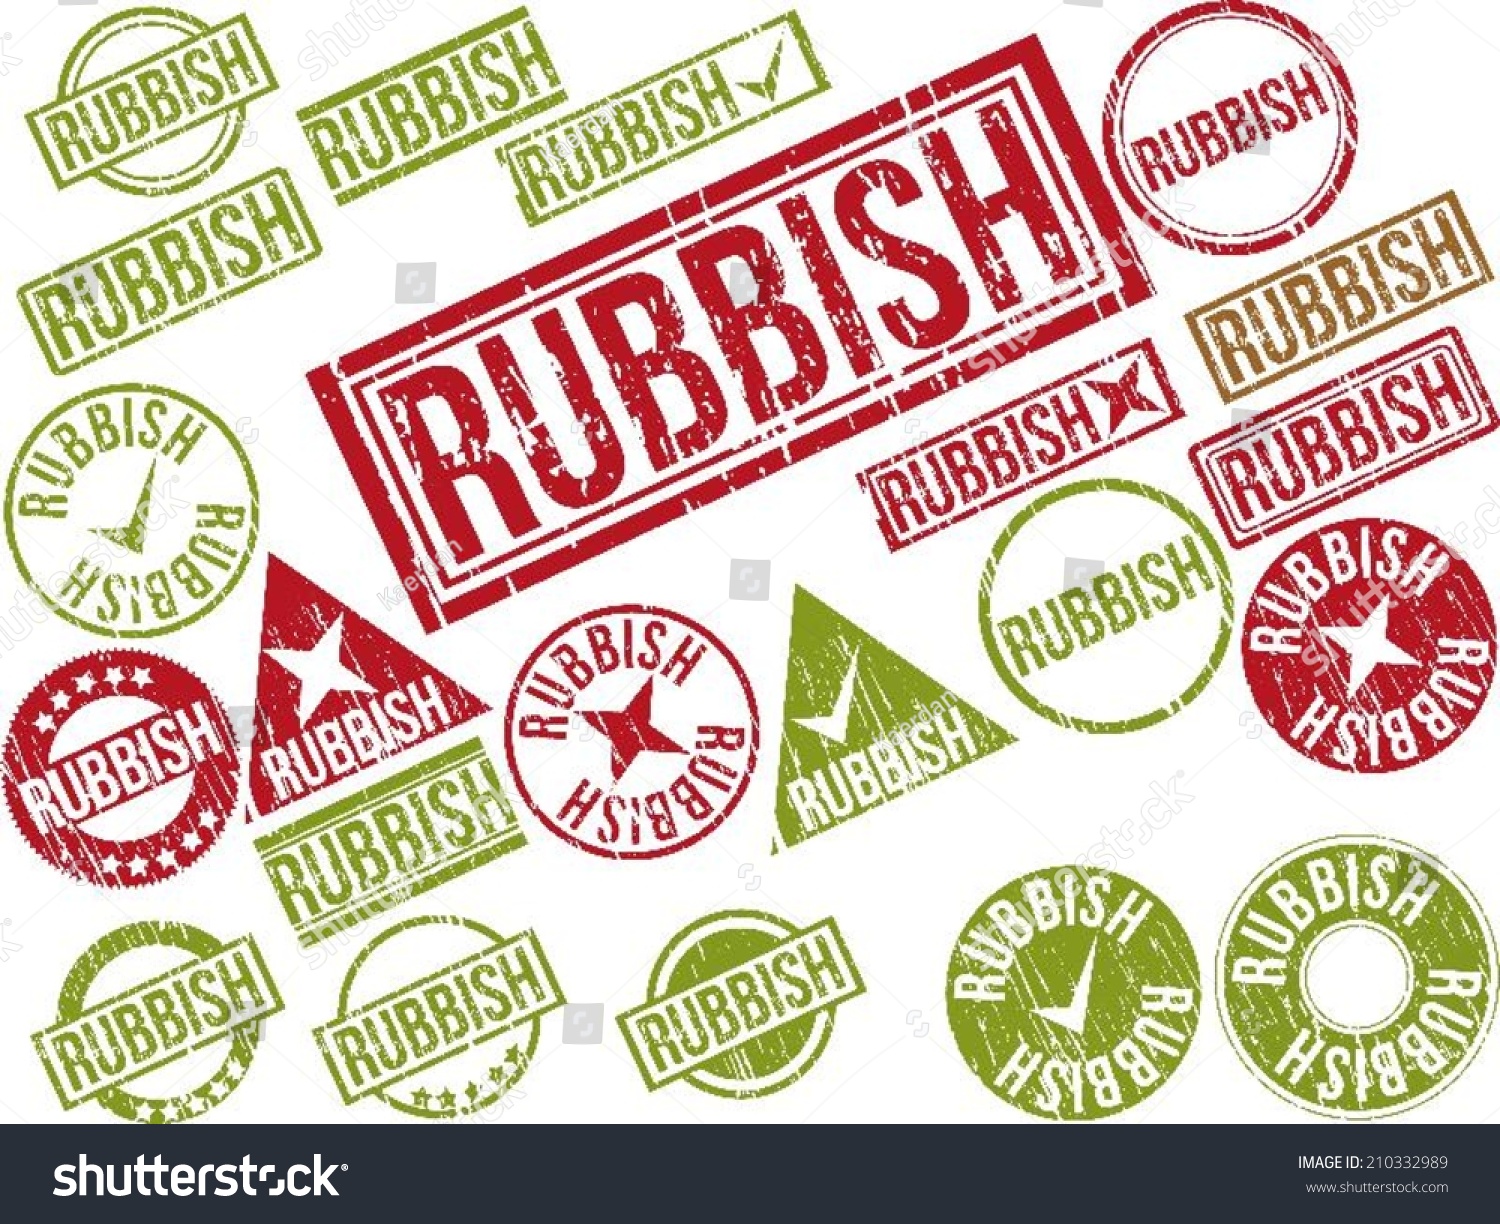 SVG of Collection of 22 red grunge rubber stamps with text 